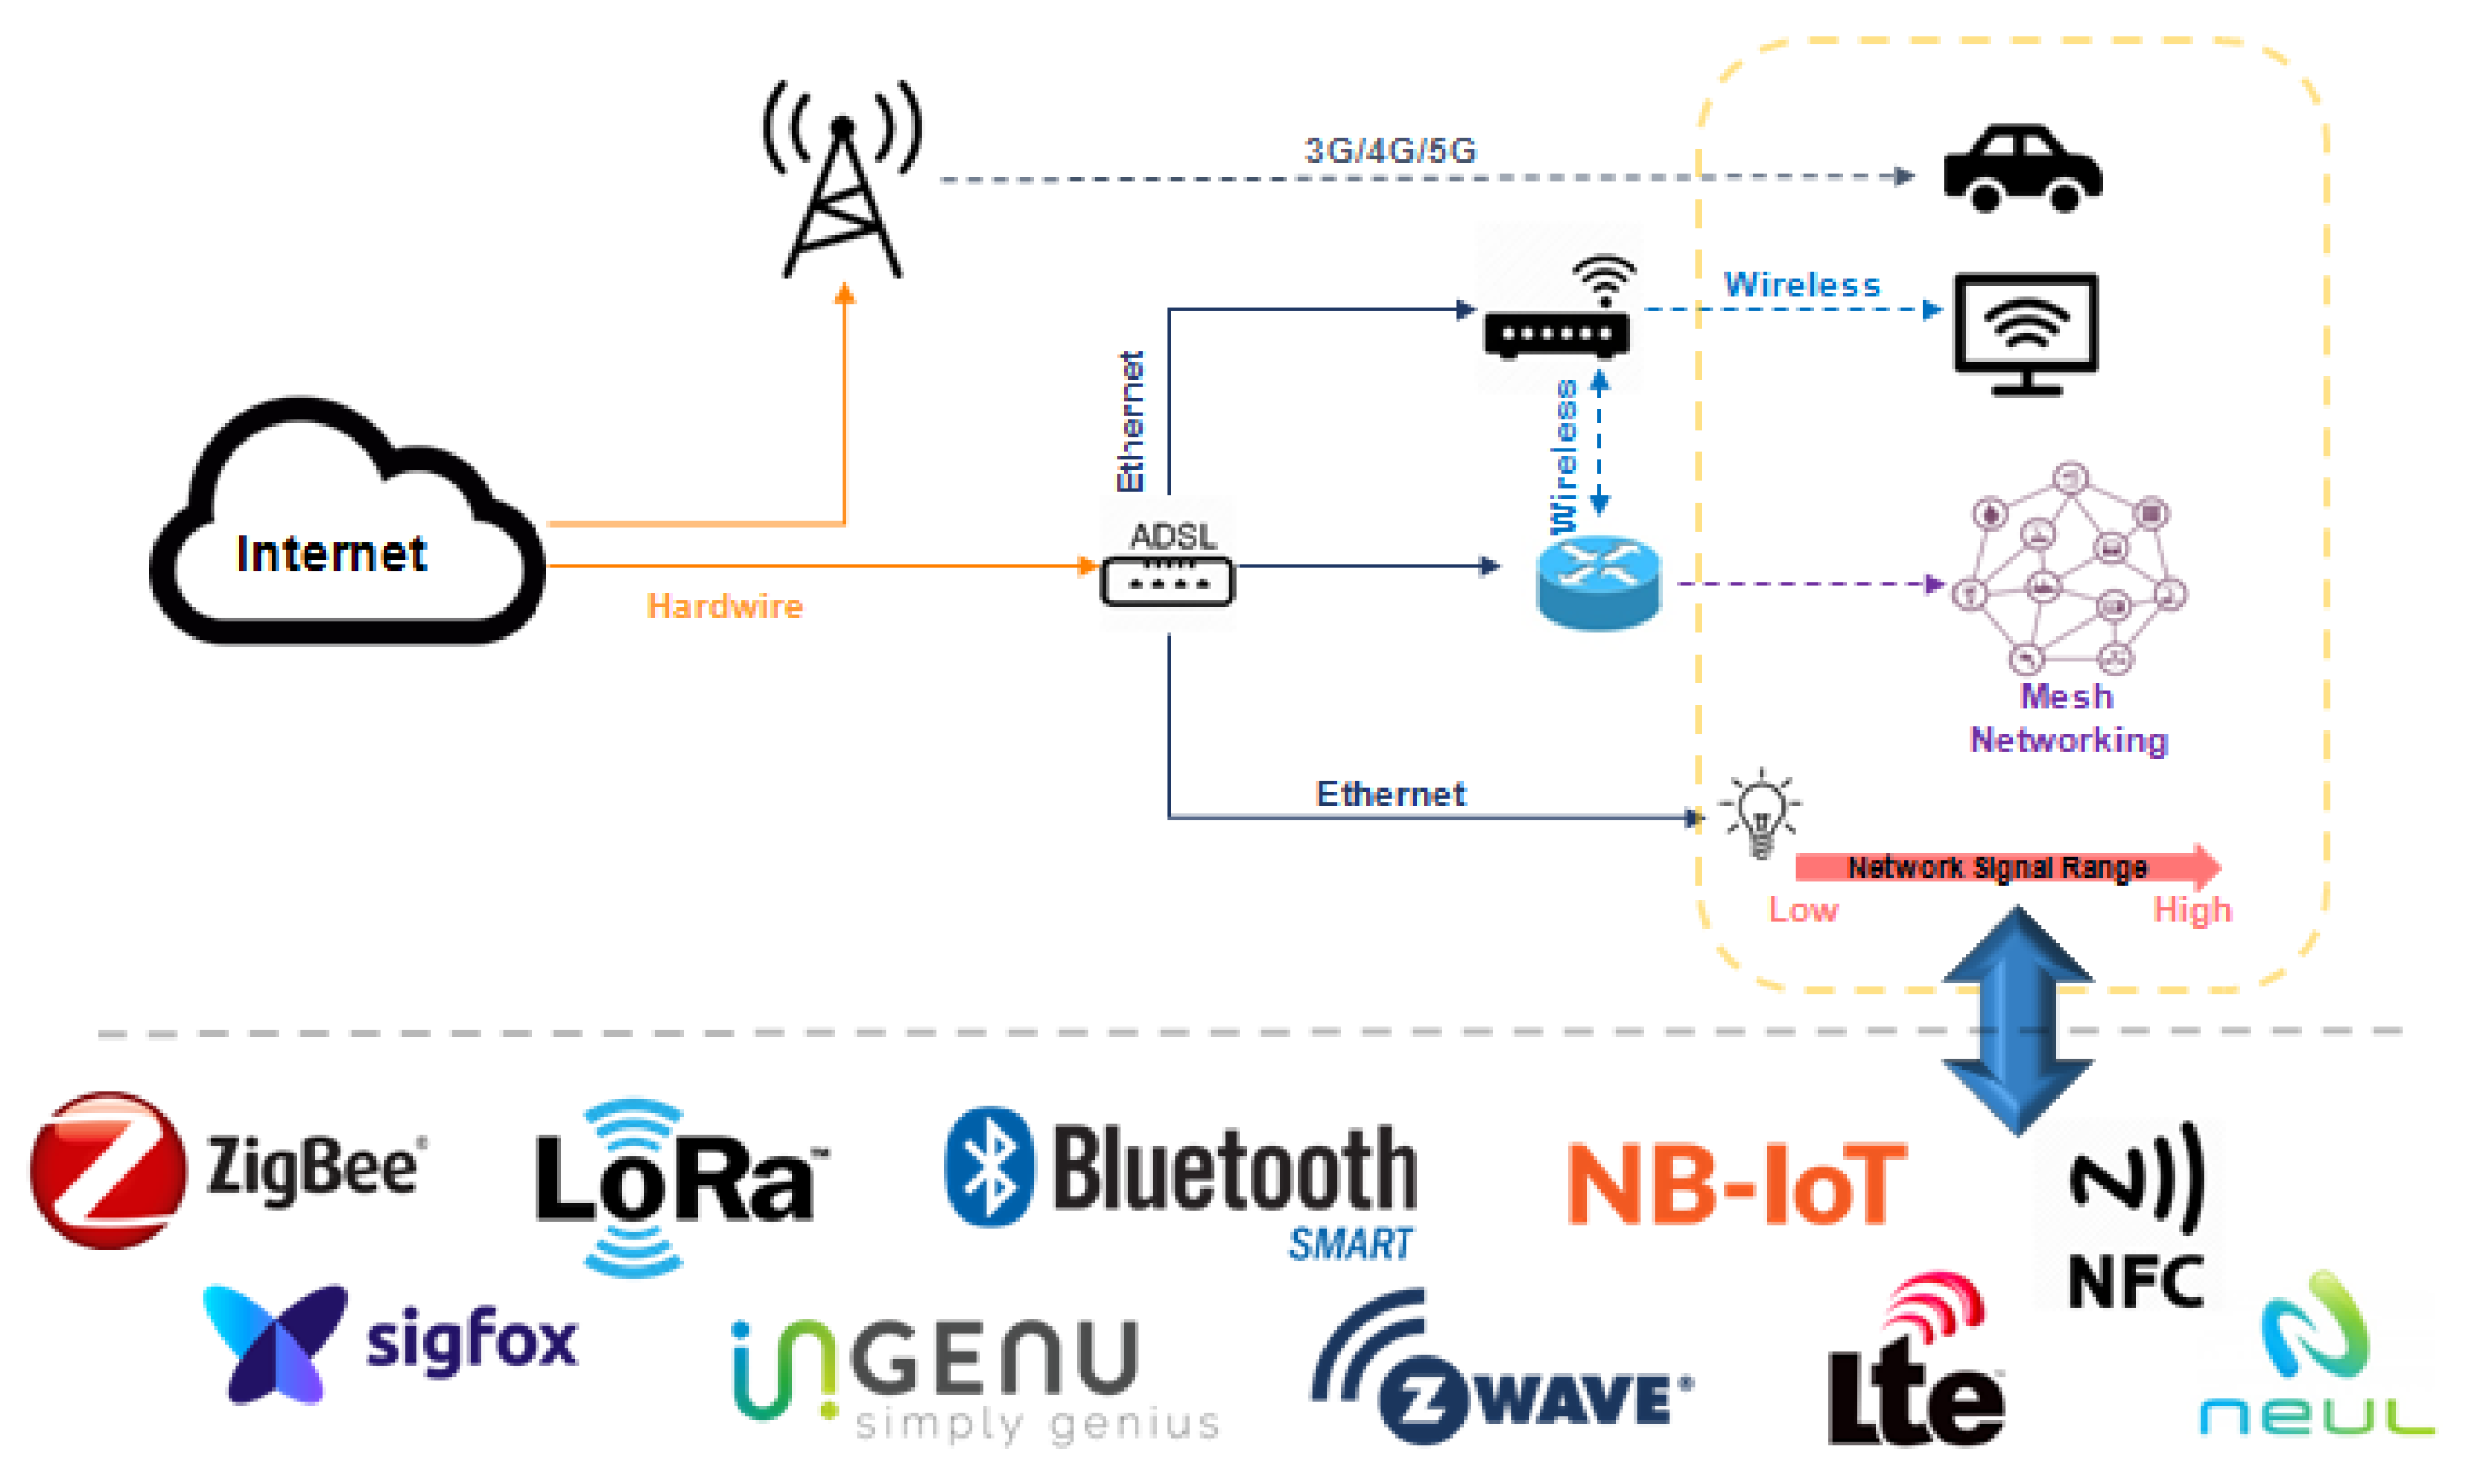 mac-aware routing metrics for the internet of things